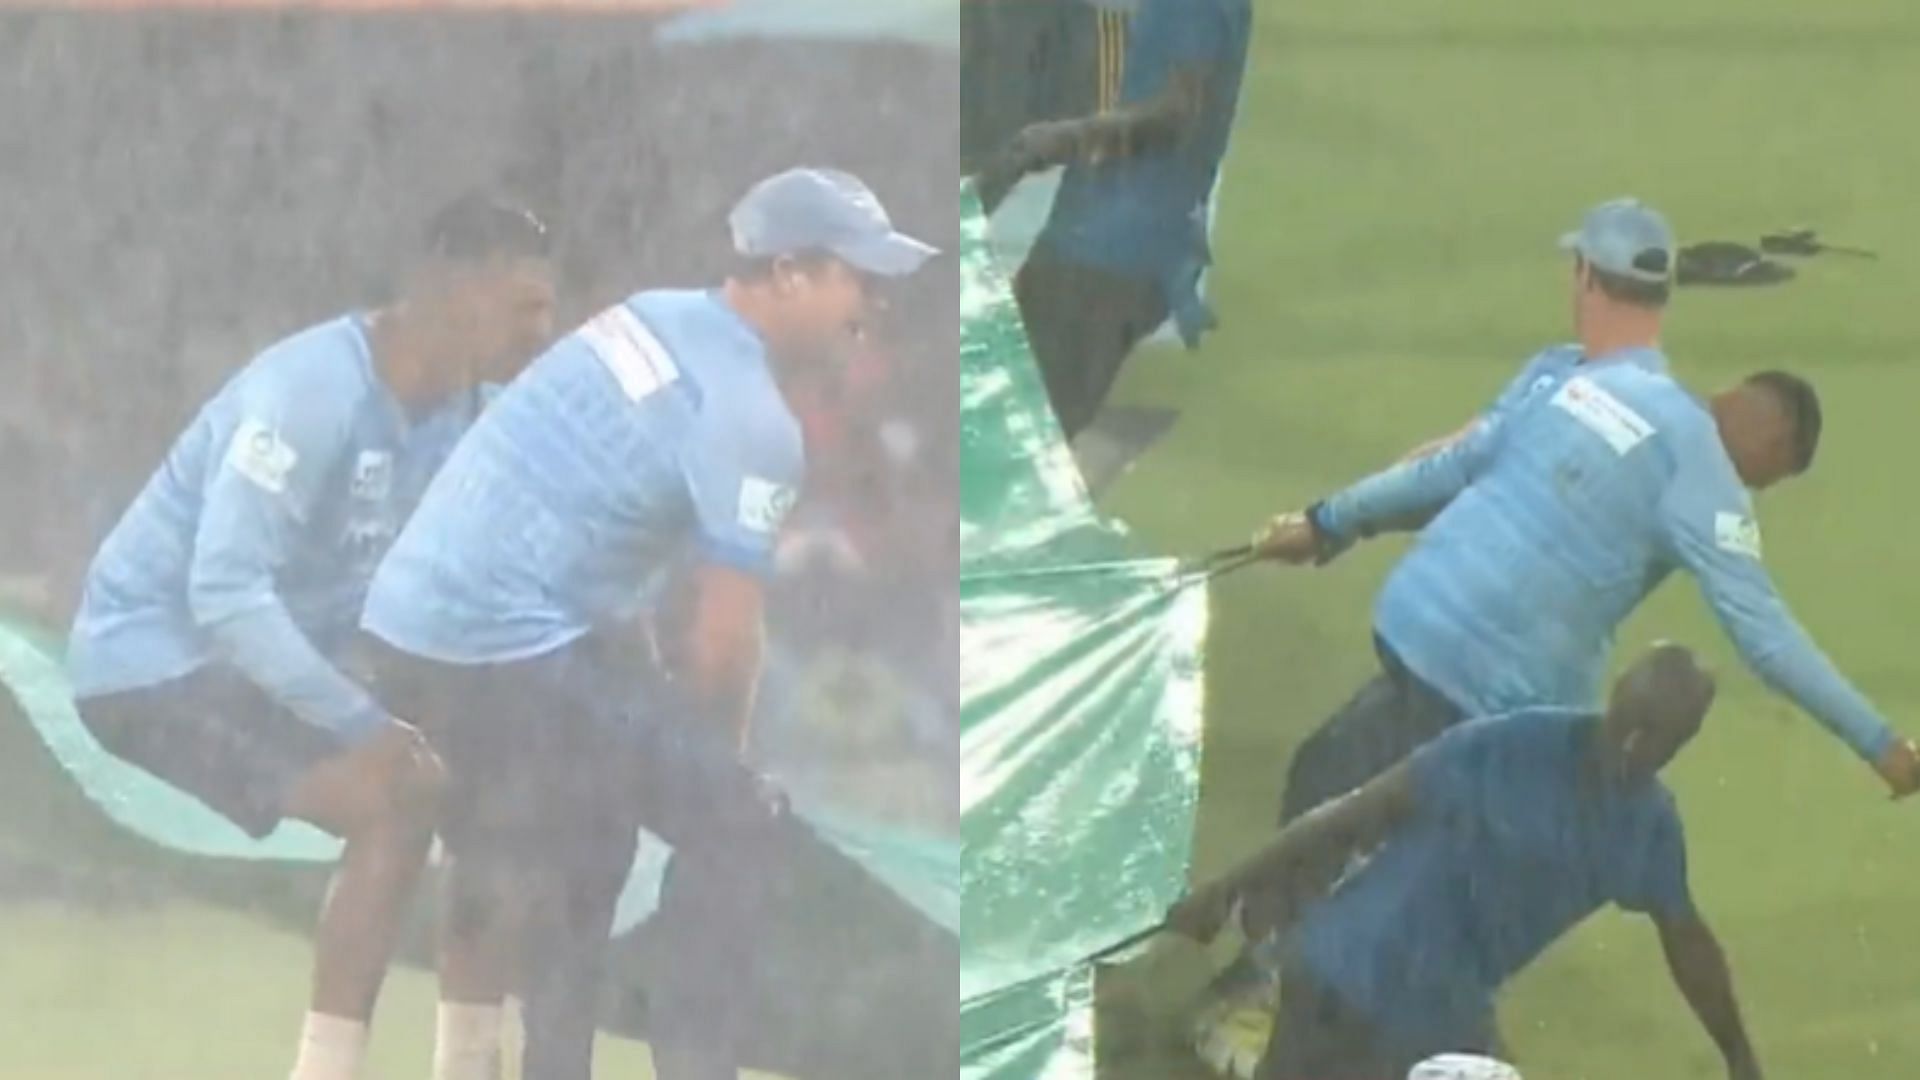 Snippets from the video where DSG staff were seen helping the groundsmen. (P.C.:Jio Cinema)